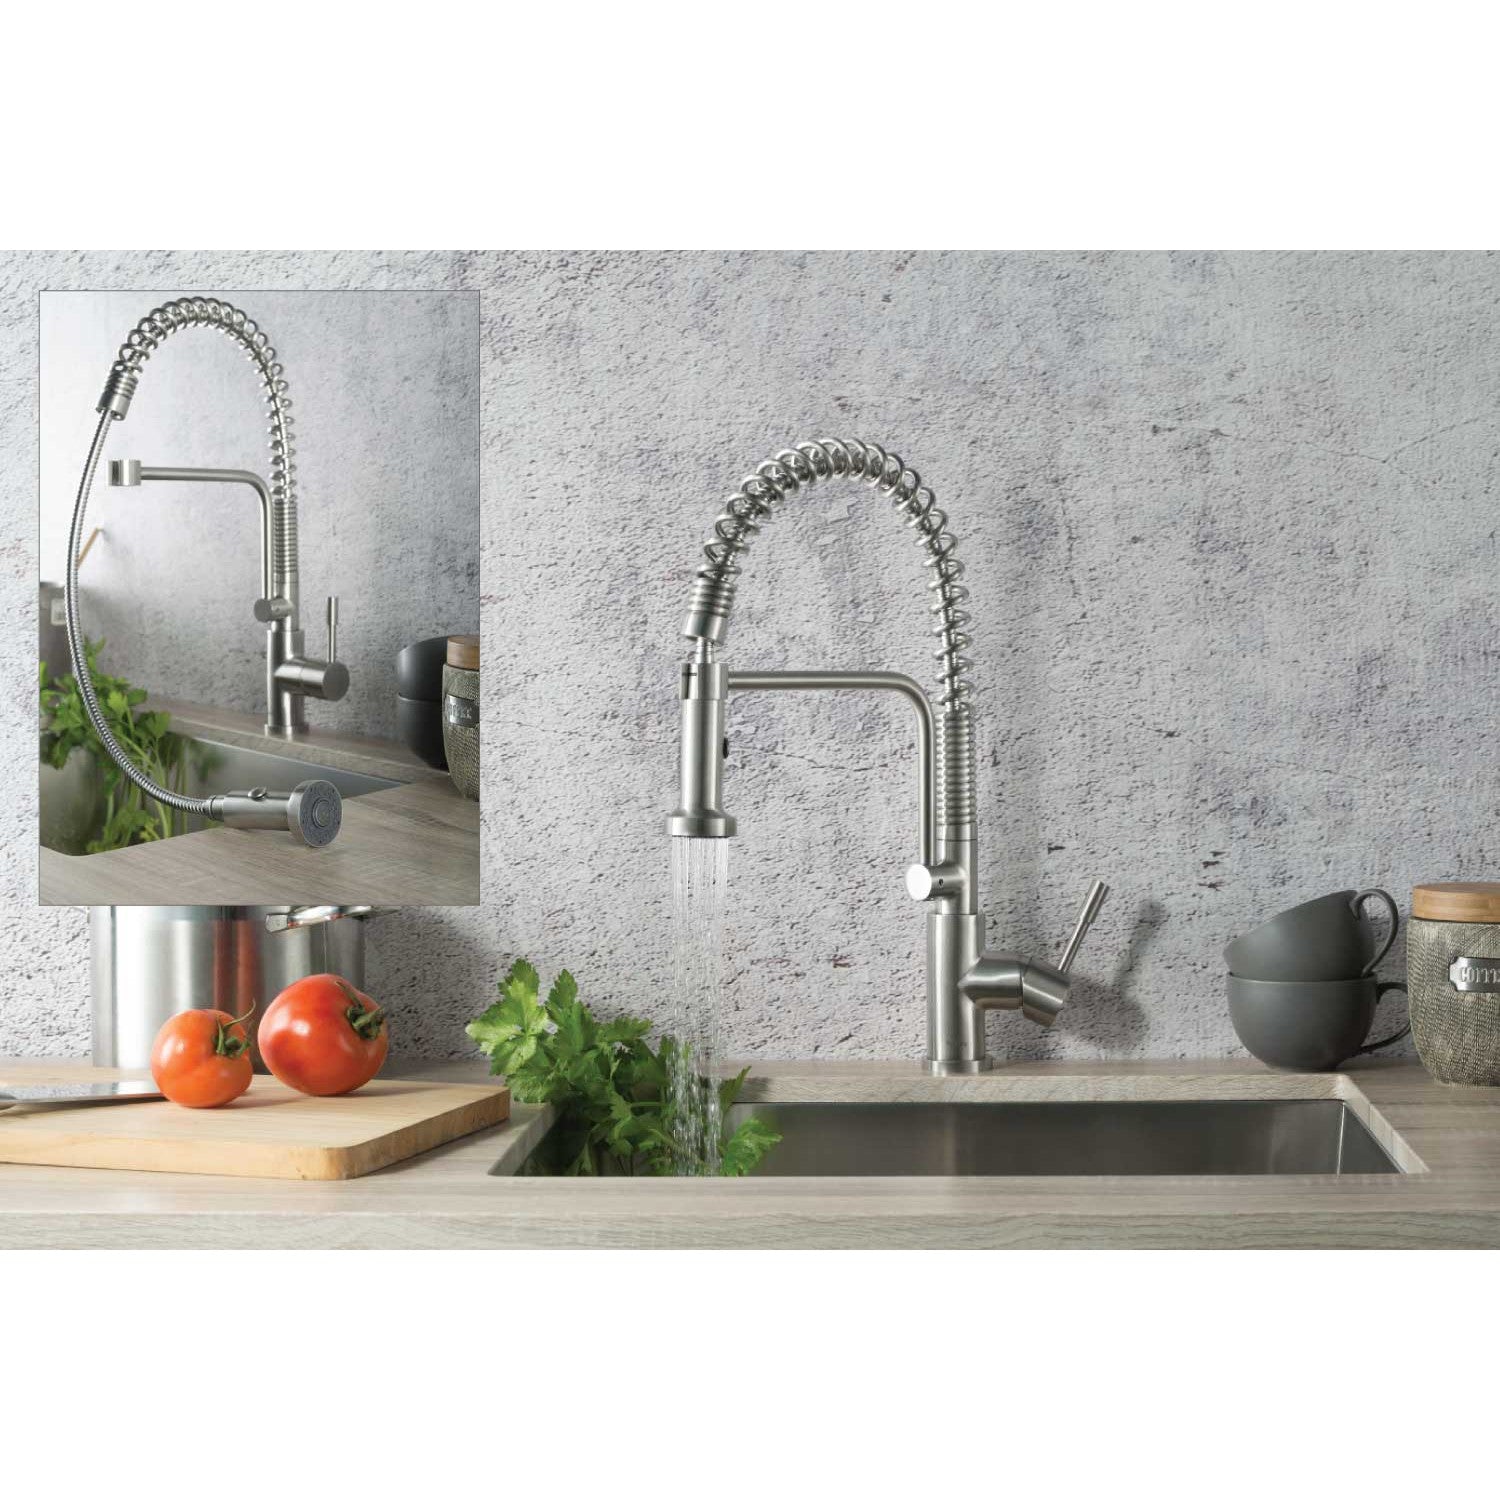 Isenberg Klassiker Caso 19" Single Hole Steel Gray Semi-Professional Stainless Steel Pull-Down Kitchen Faucet With Dual Function Sprayer